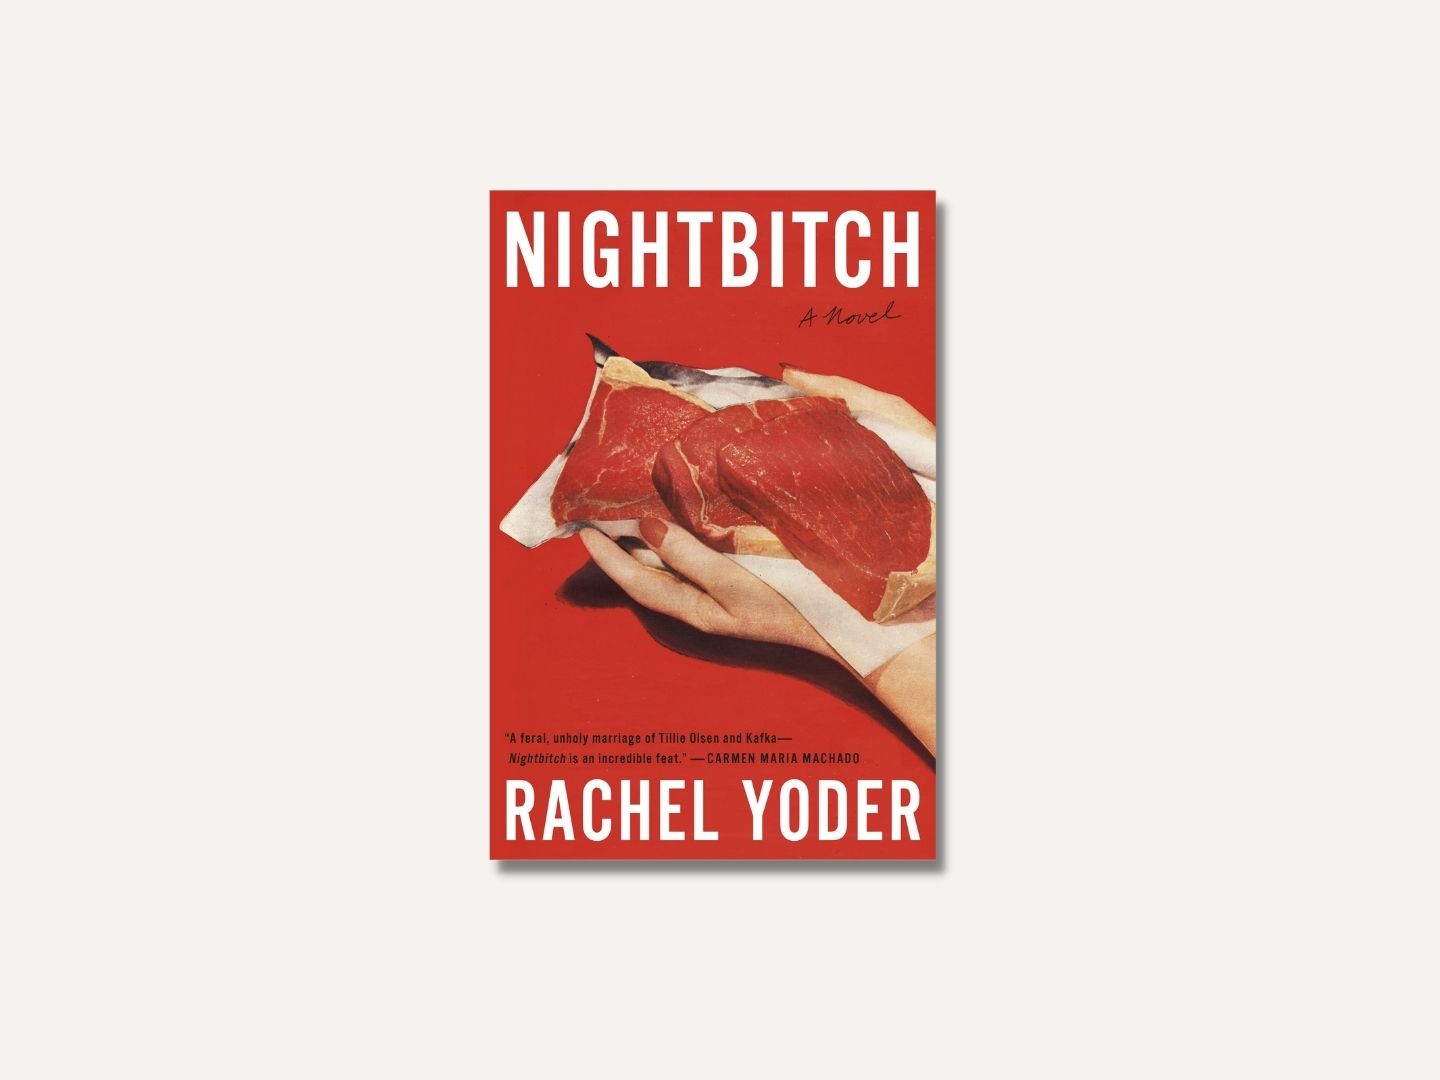 Book review Rachel Yoders debut novel Nightbitch explores the difficulties of modern motherhood Options, The Edge